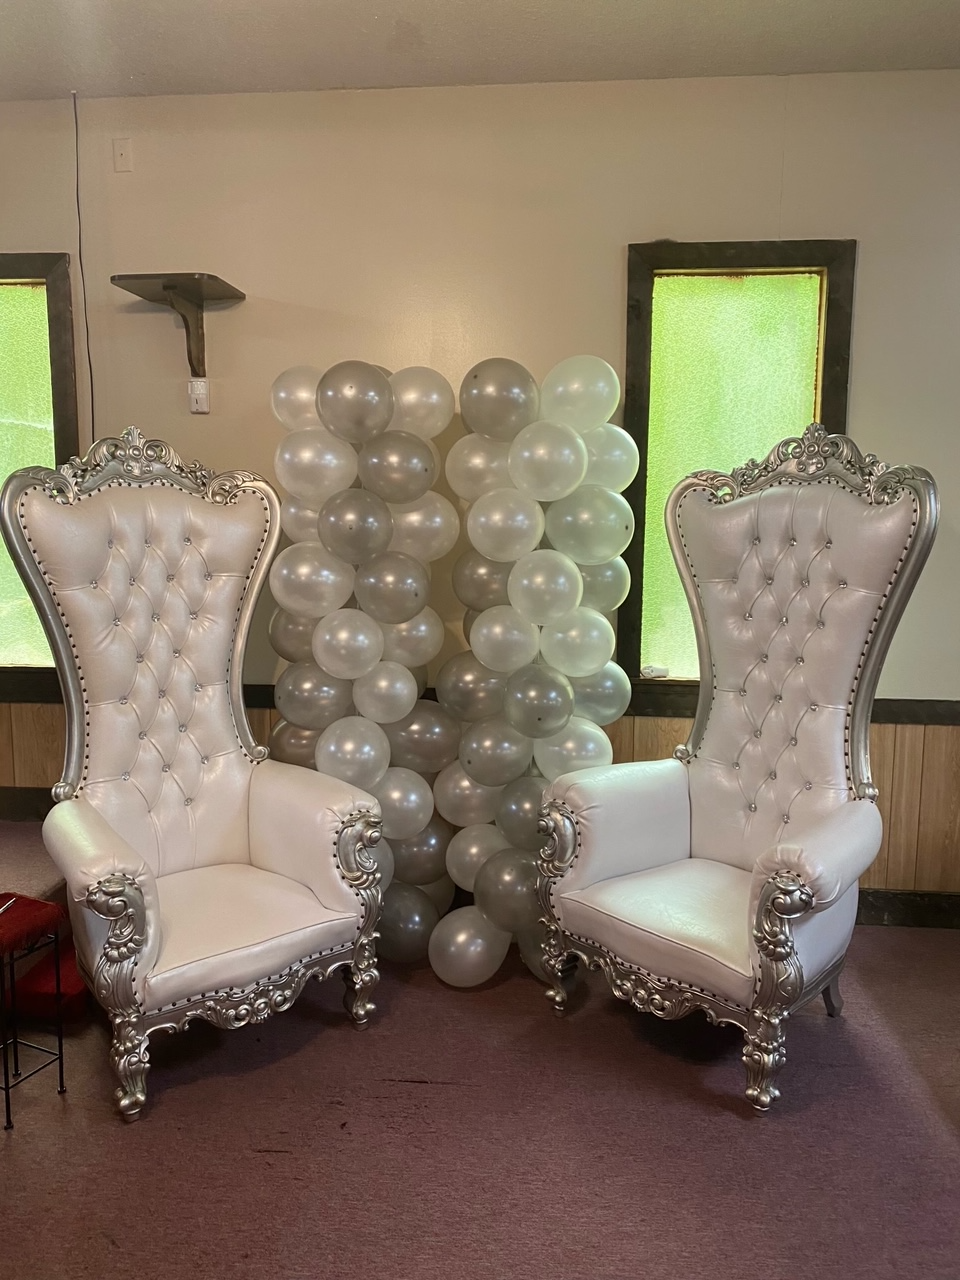 King Queen Chairs